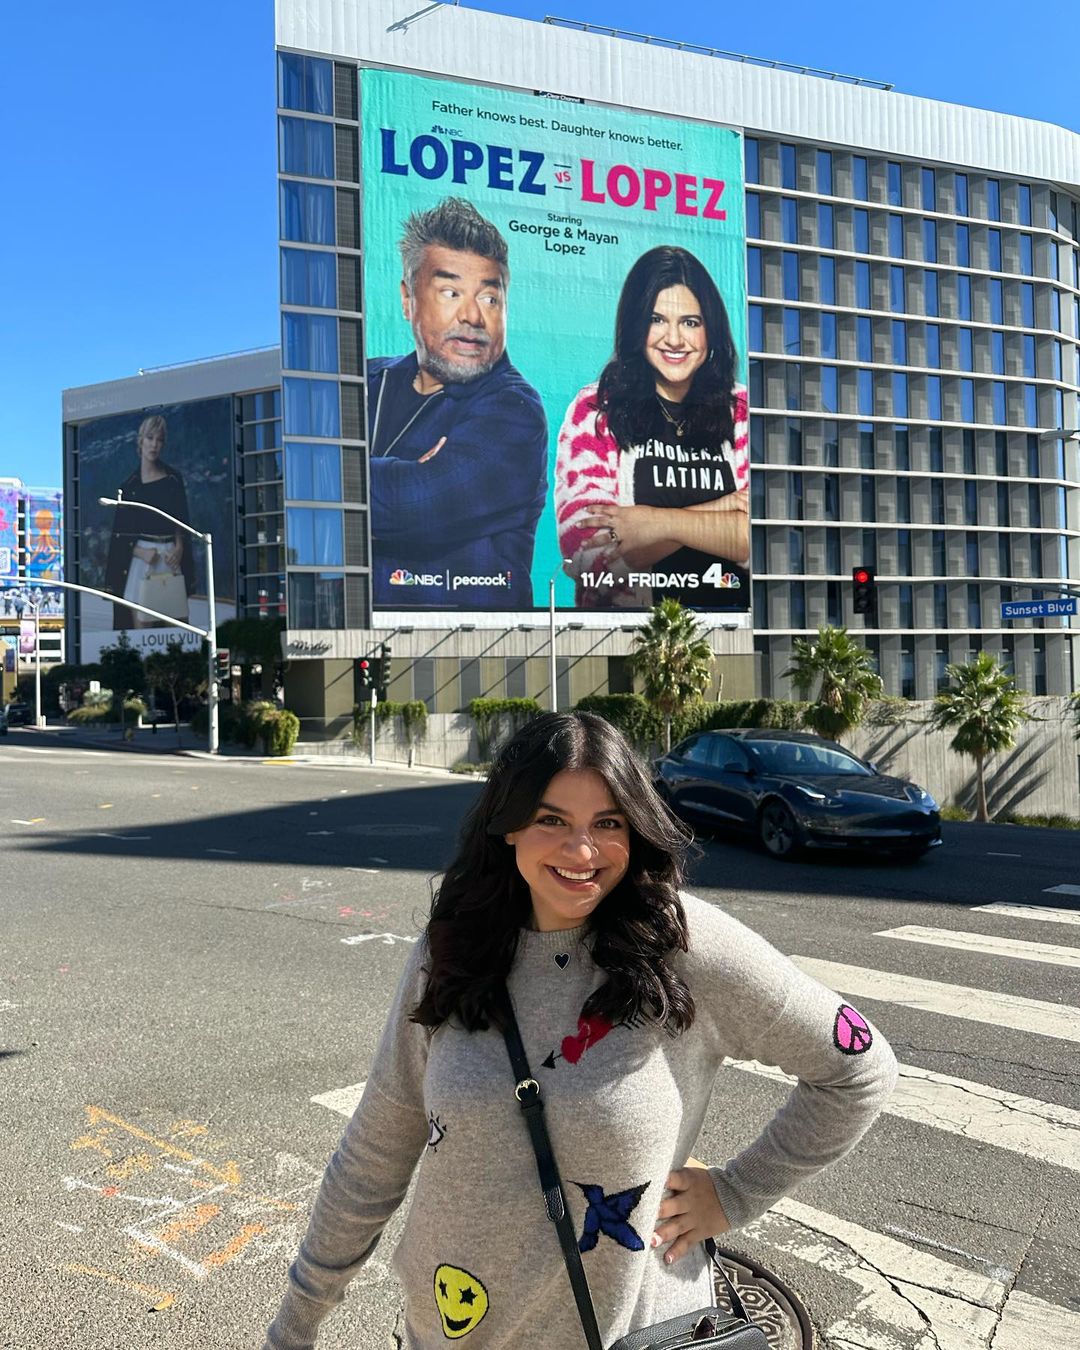 Mayan Lopez infront of 'Lopez vs. Lopez' billboard in West Hollywood